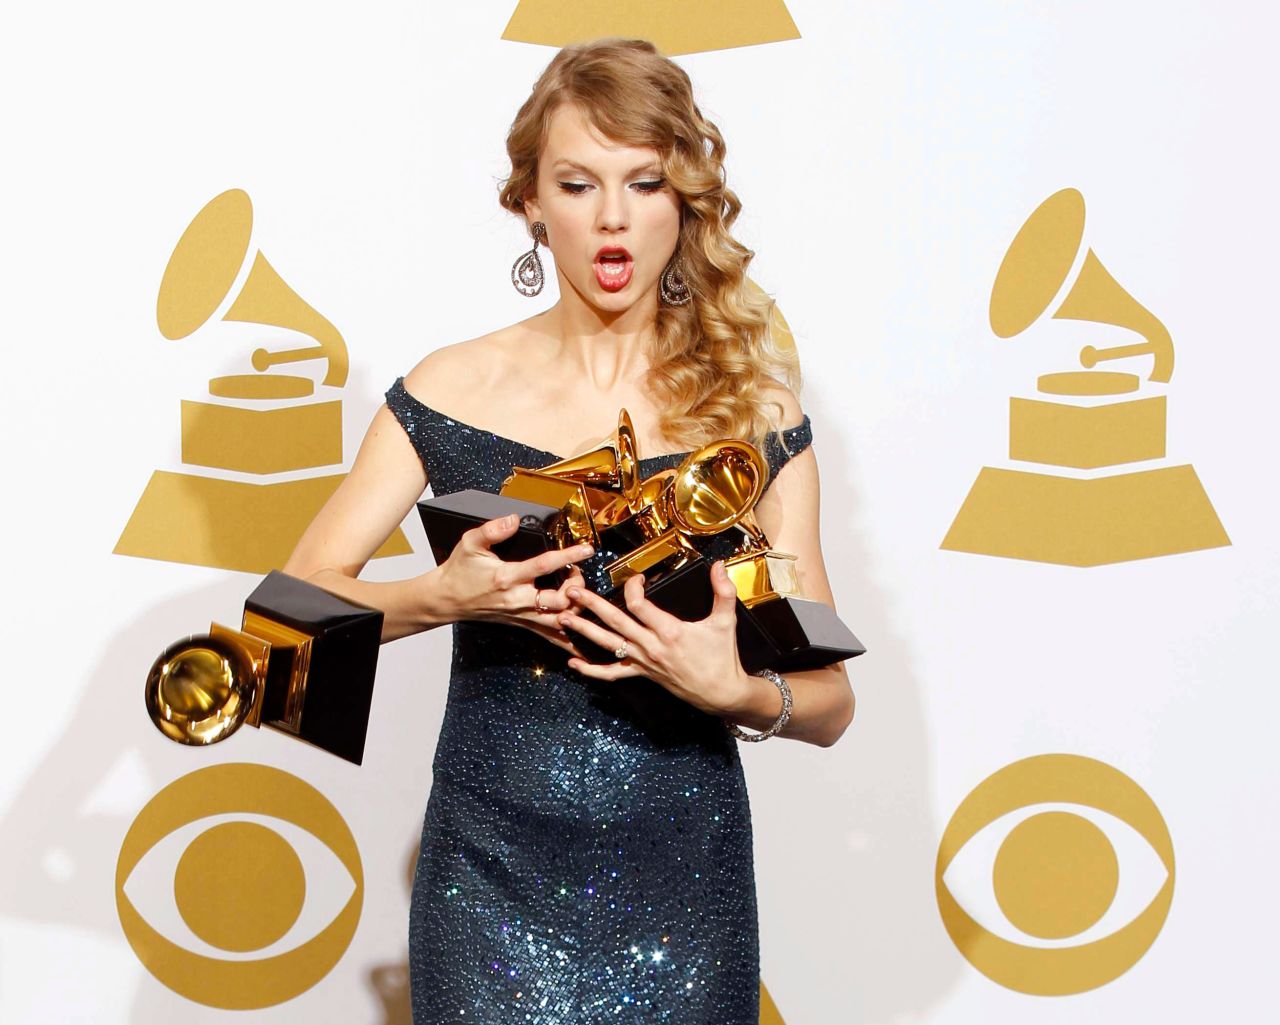 Swift drops one of her four Grammys at the 52nd annual Grammy Awards in Los Angeles in 2010. That year she won album of the year, best country album, best female country vocal performance and best country song.